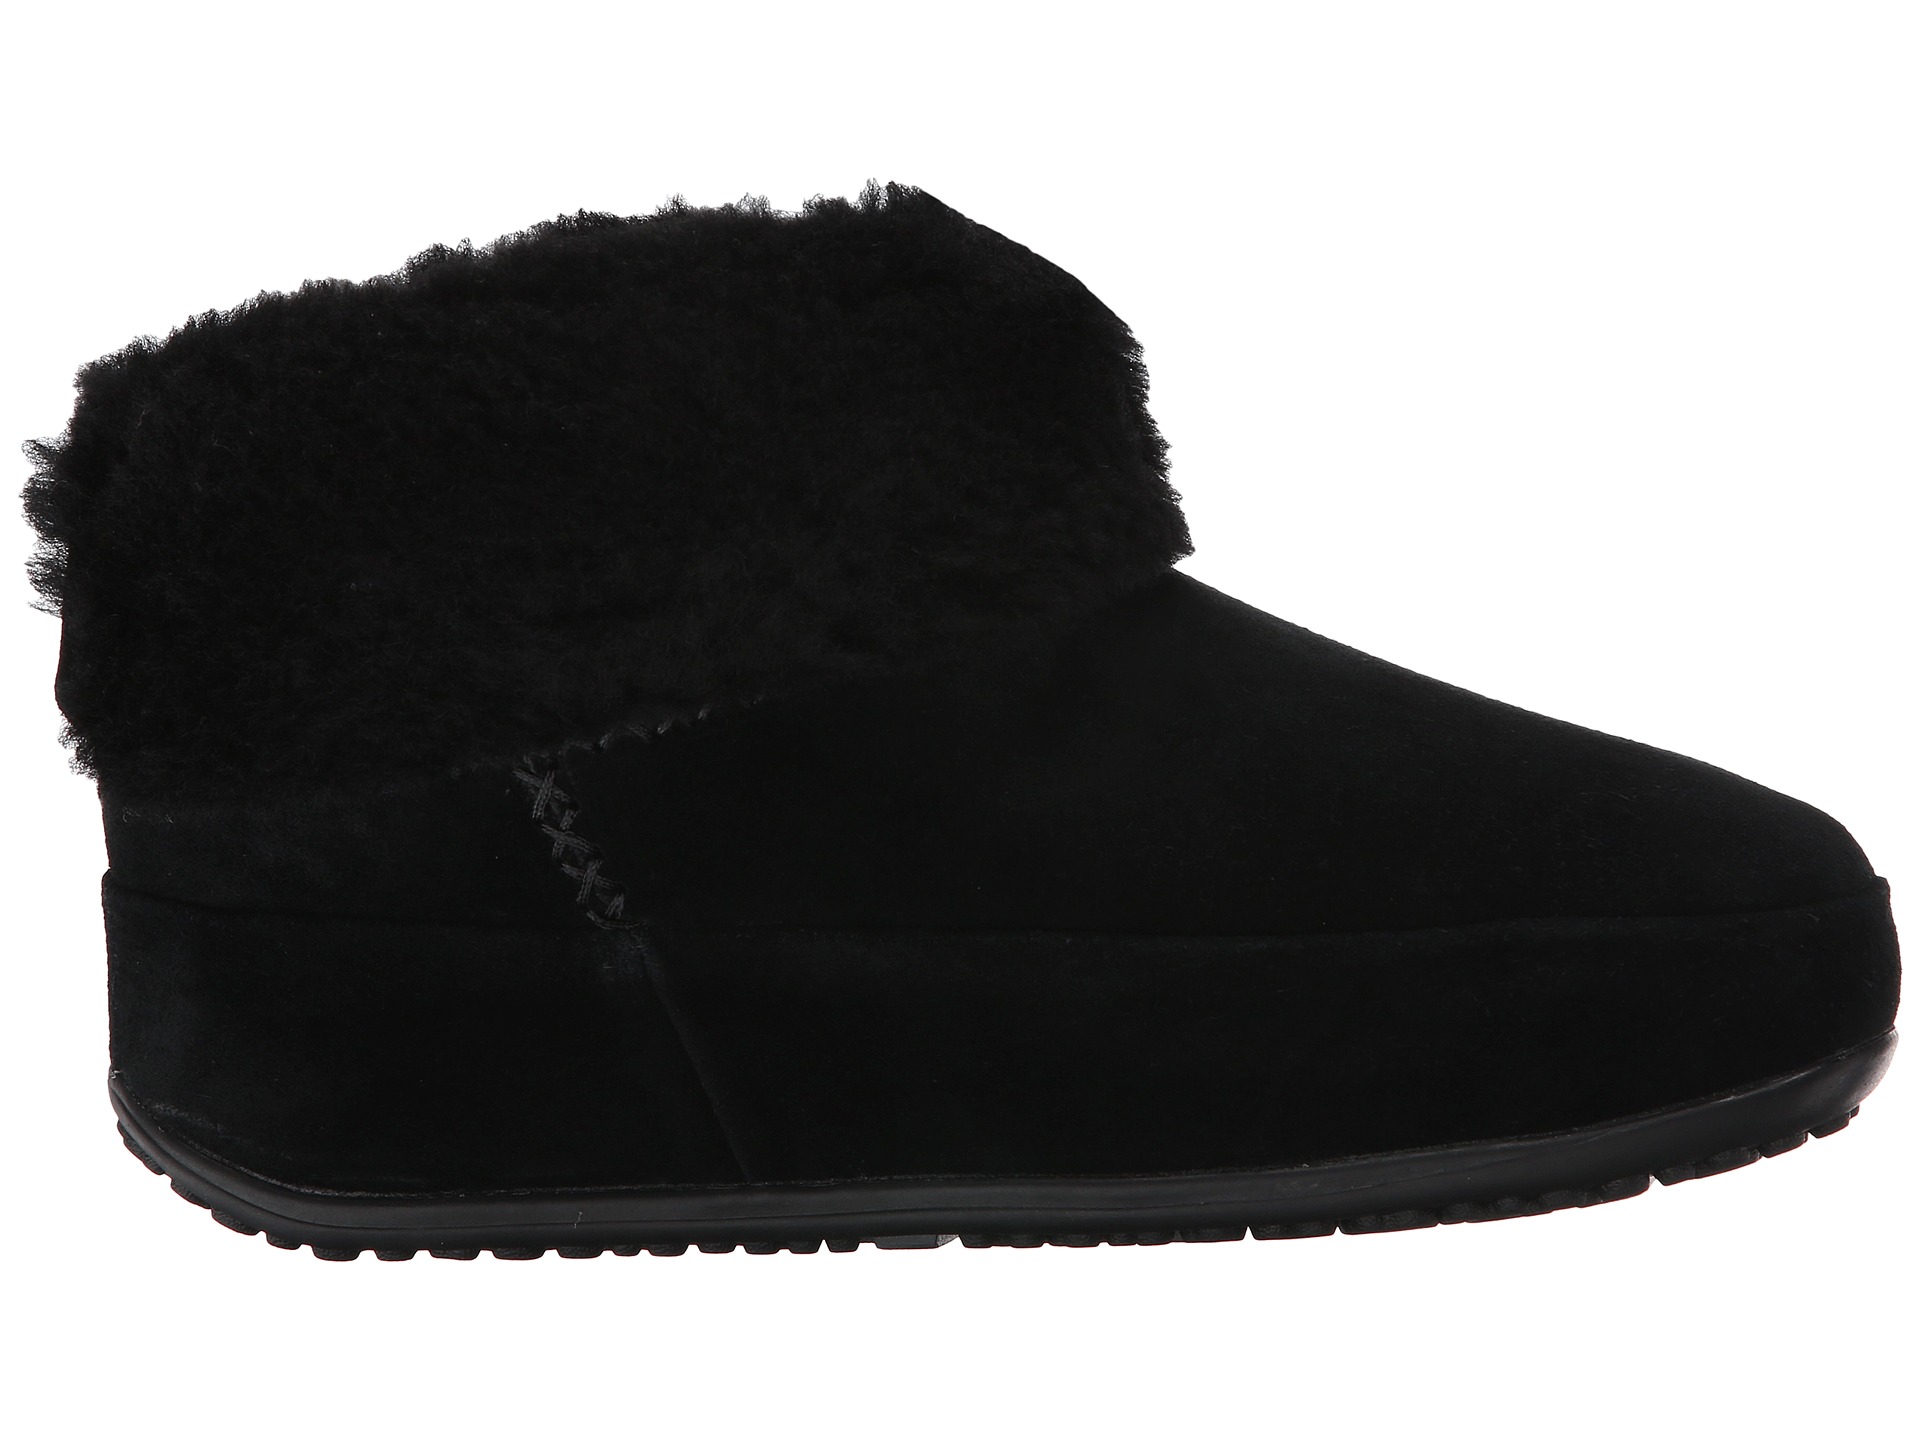 FitFlop Mukluk Shorty All Black - Zappos.com Free Shipping BOTH Ways